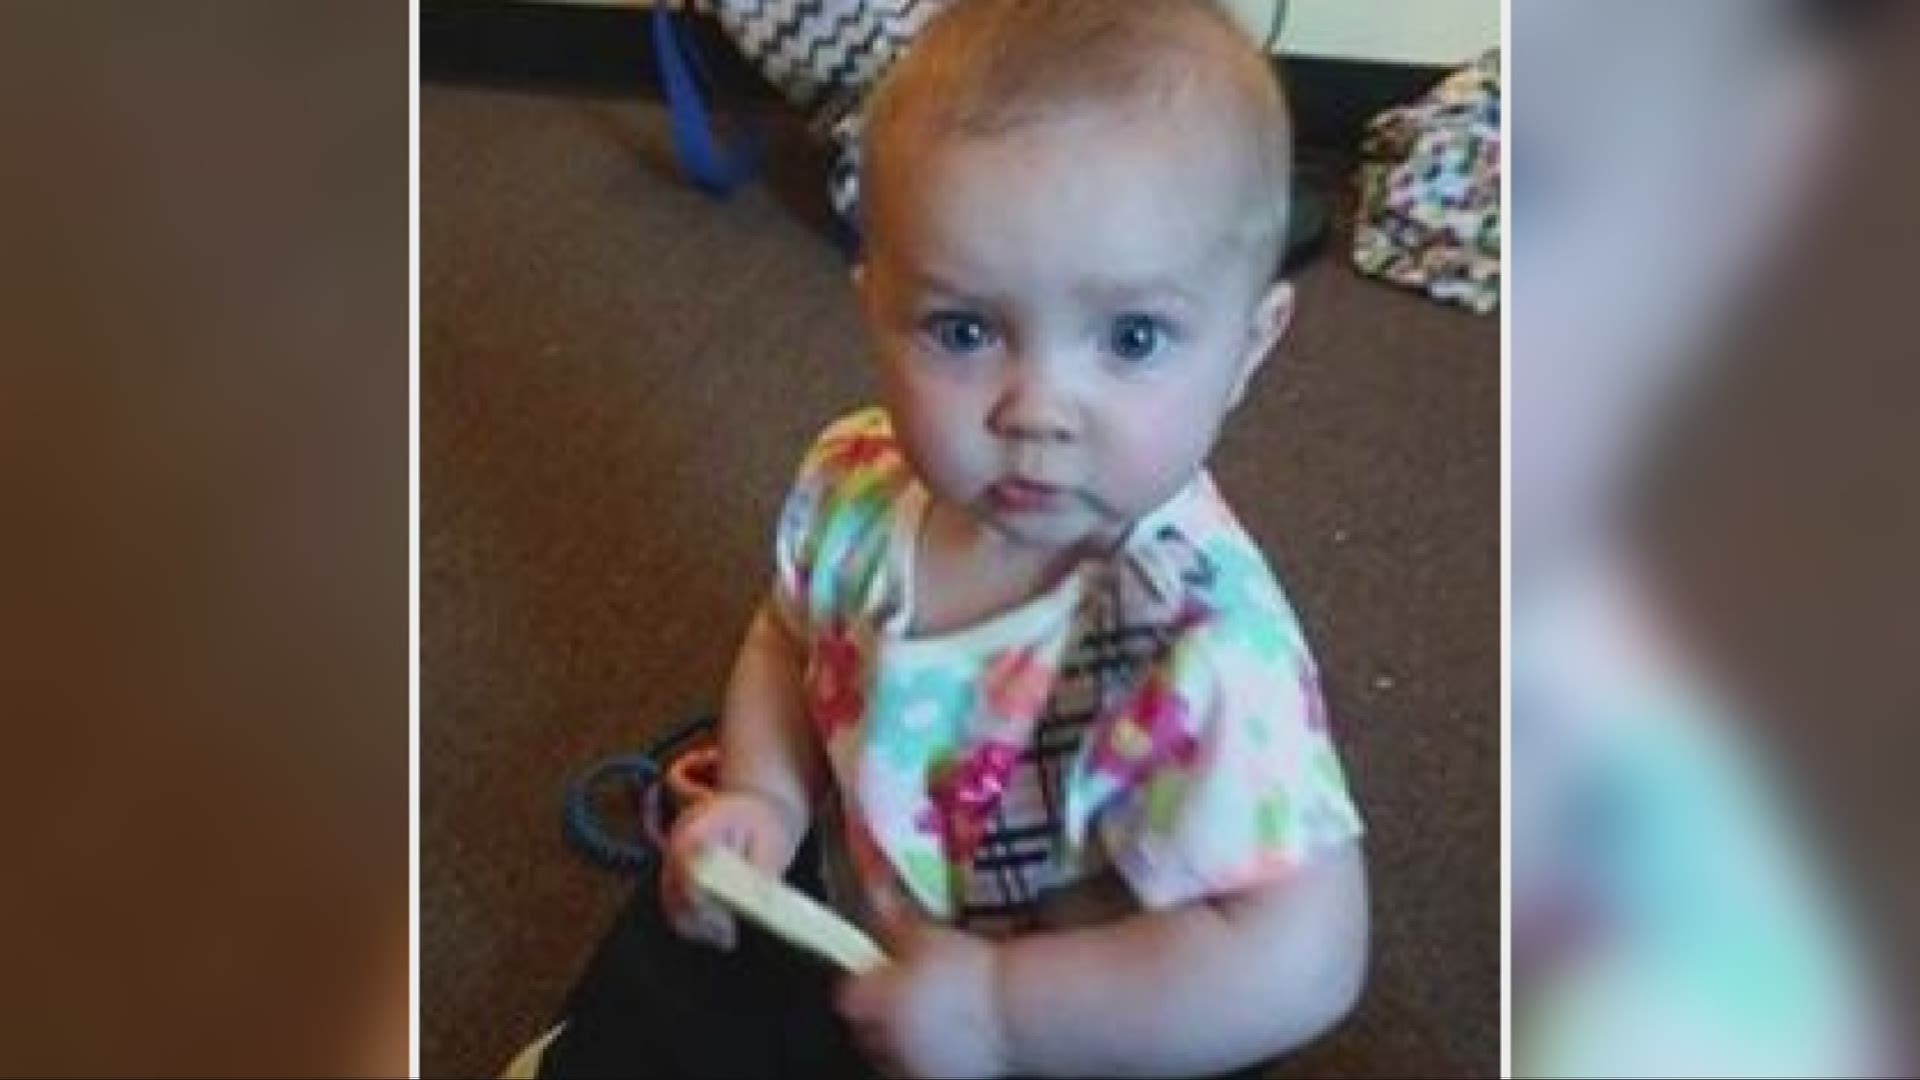 Conneaut baby died due to blunt force trauma